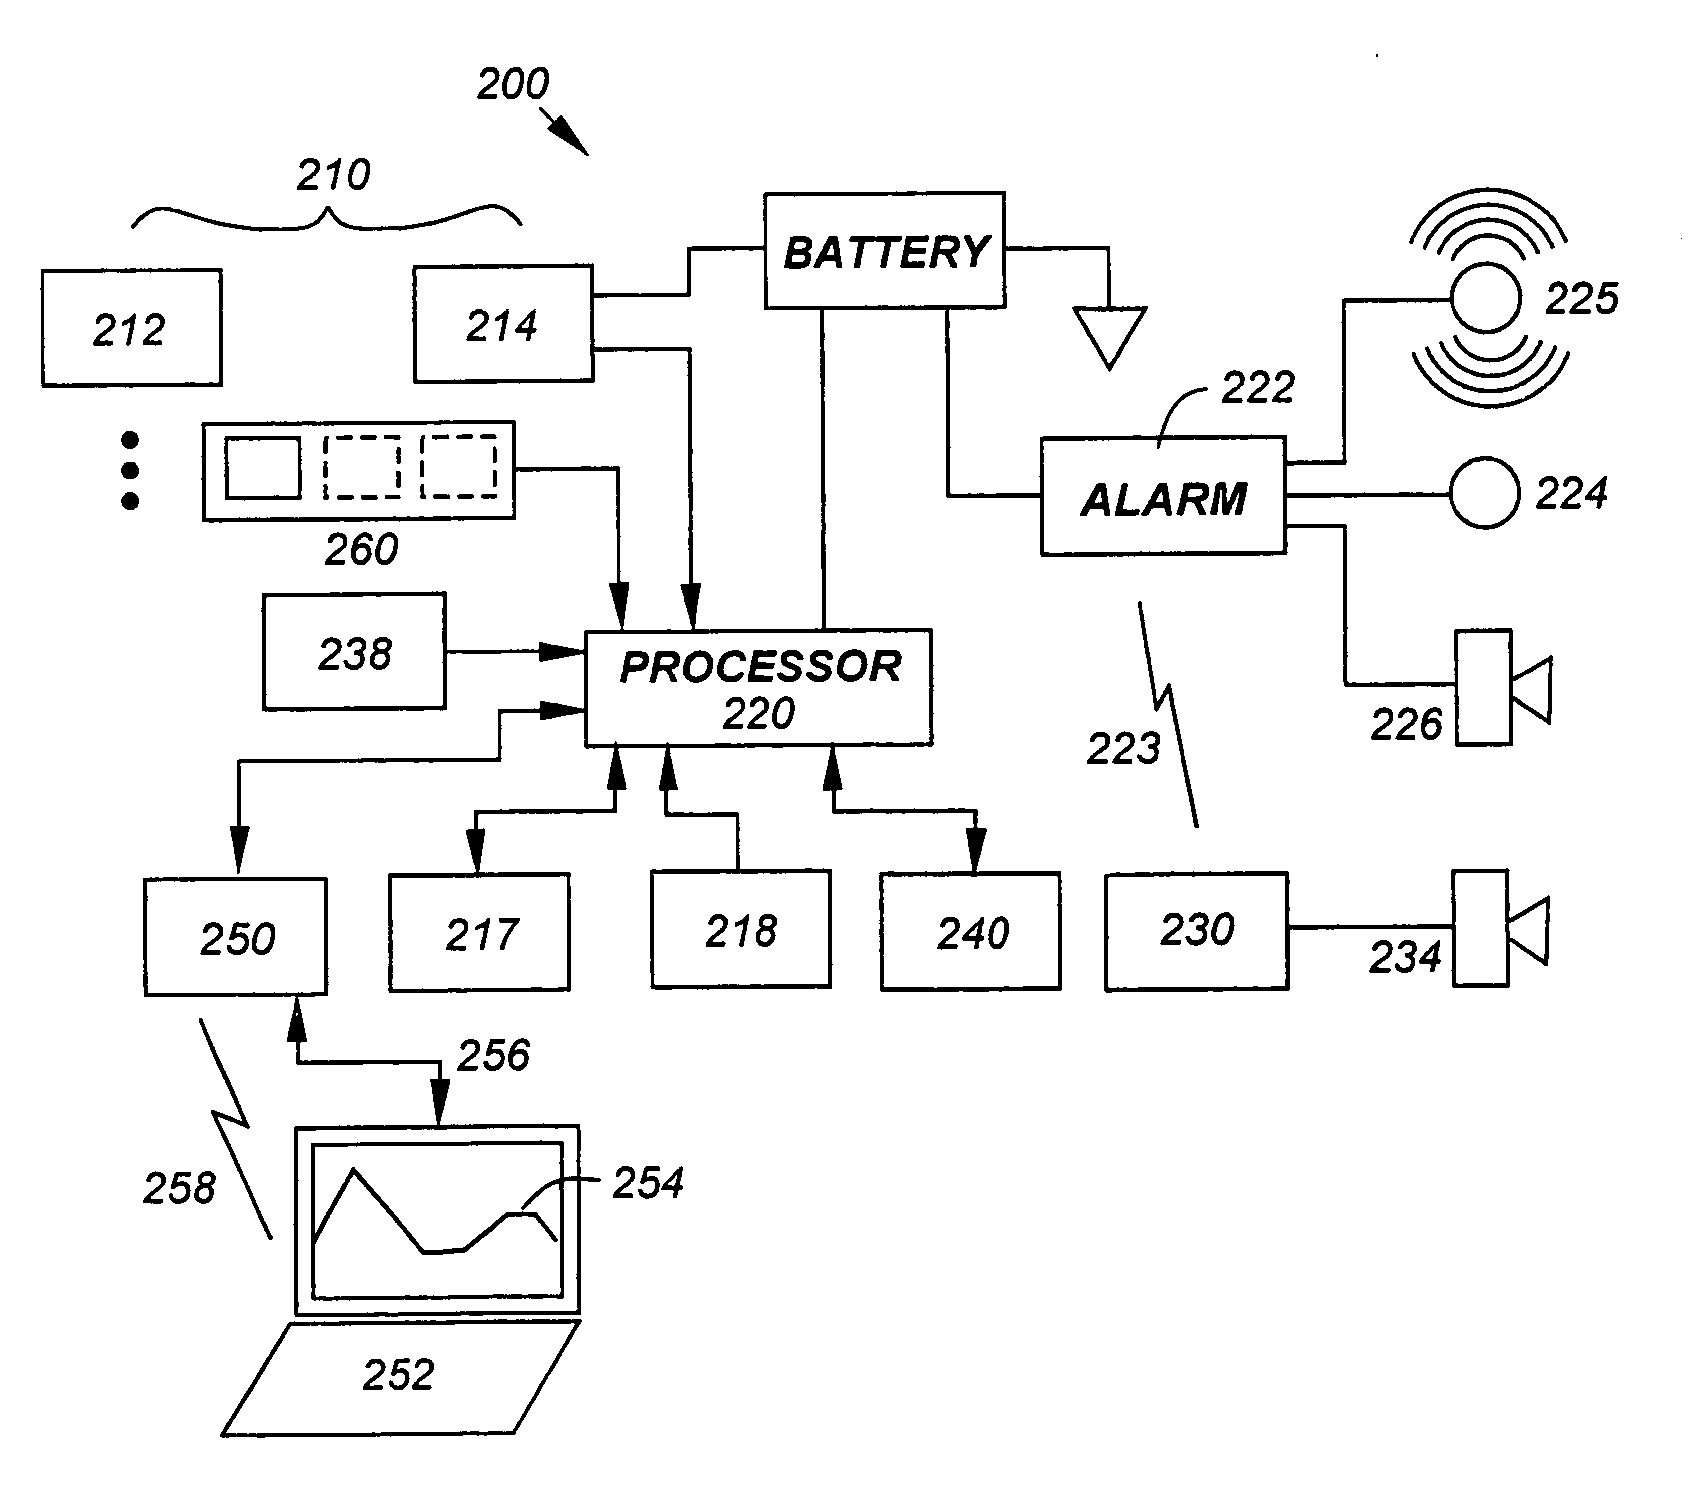 Awareness enhancement and monitoring devices for the treatment of certain impulse control disorders